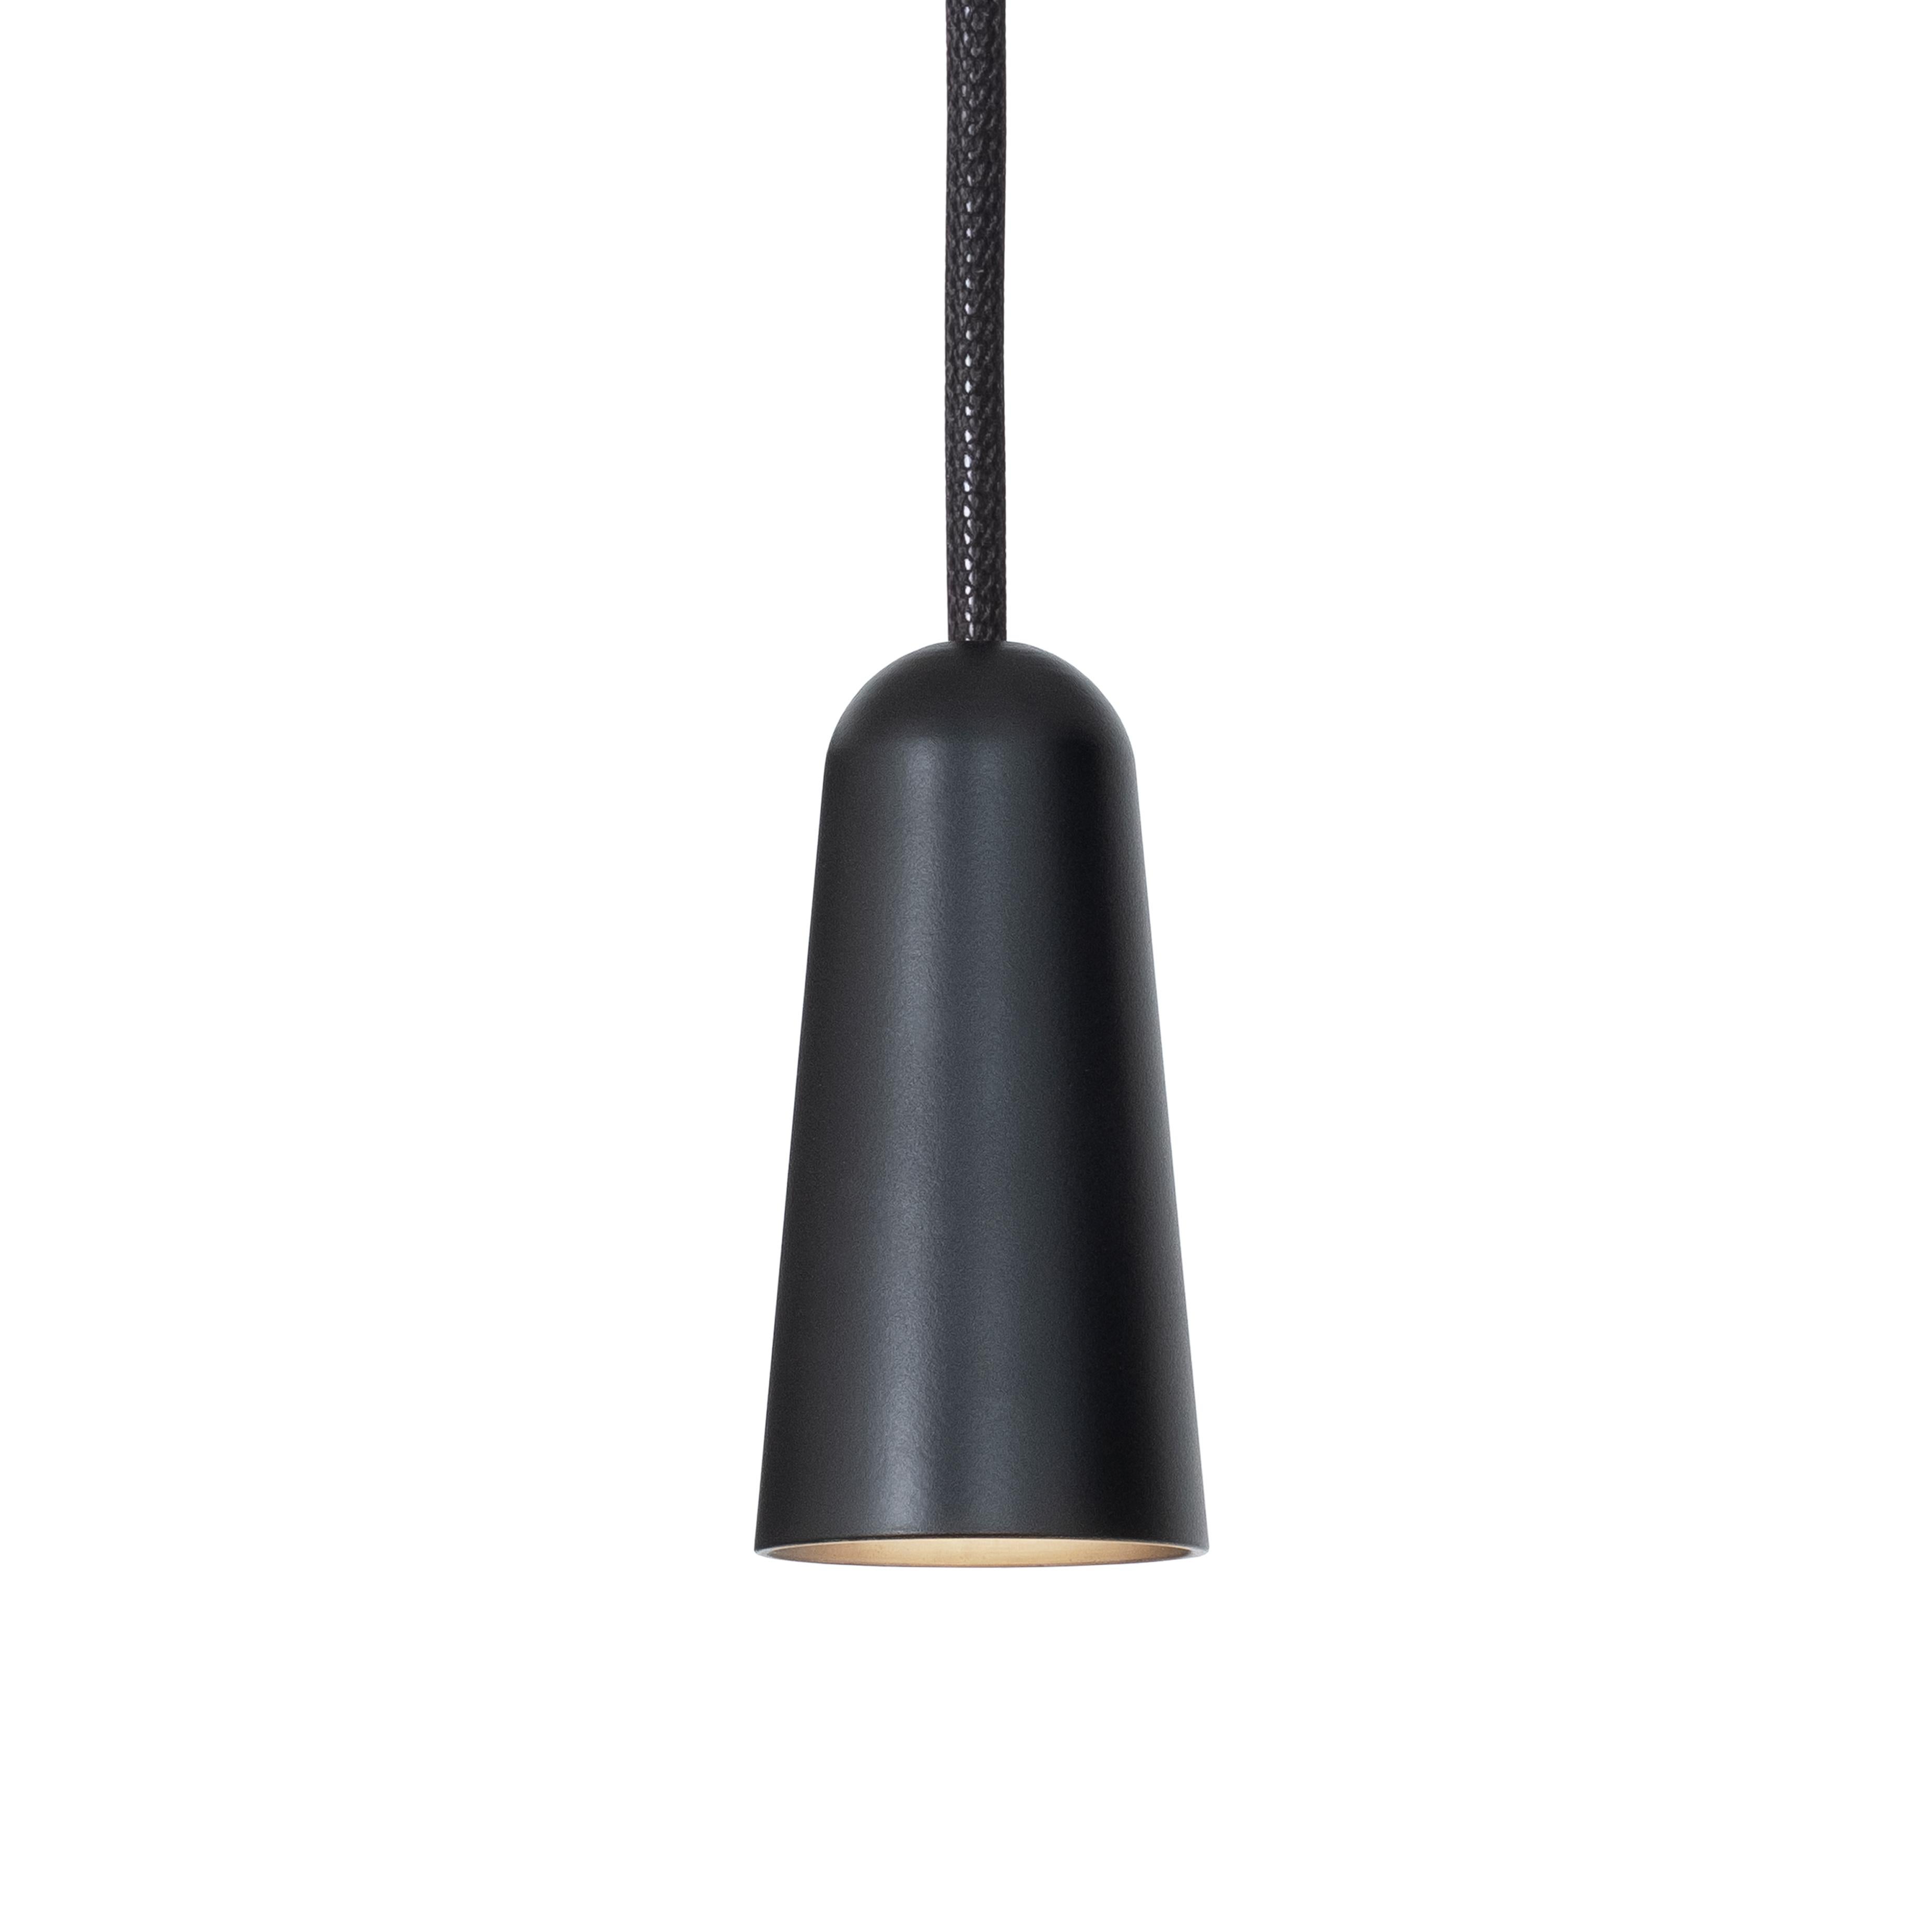 Ceiling lamp model 3493-8 Massiv black EDT by Henrik Tengler and manufactured by Konsthantverk.

The production of lamps, wall lights and floor lamps are manufactured using craftsman’s techniques with the same materials and techniques as the first